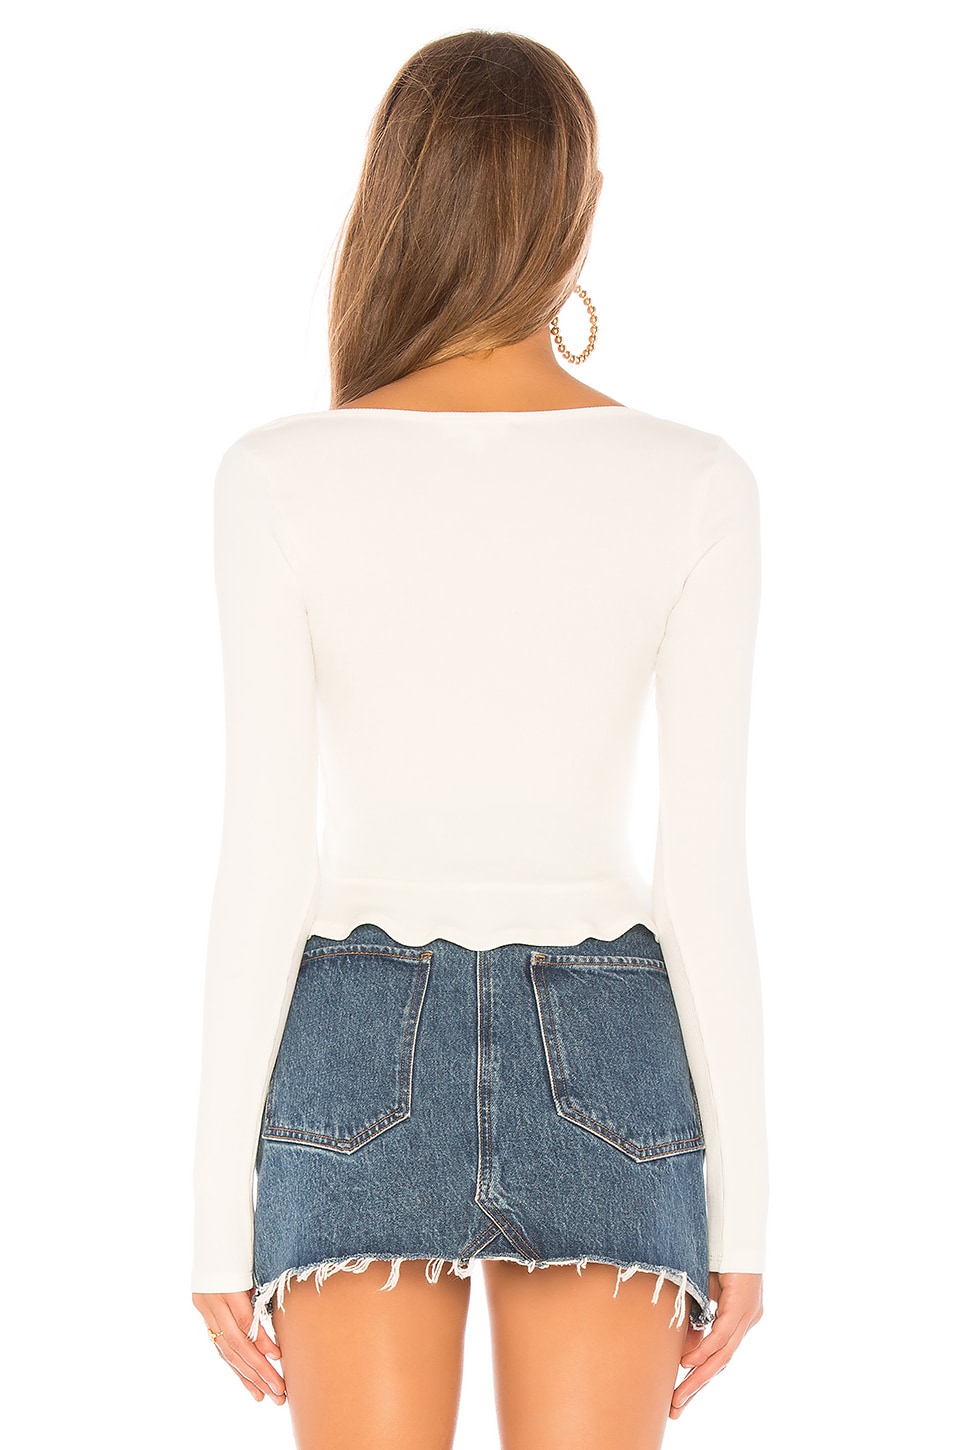 Shop About Us Priscilla Ribbed Top In White